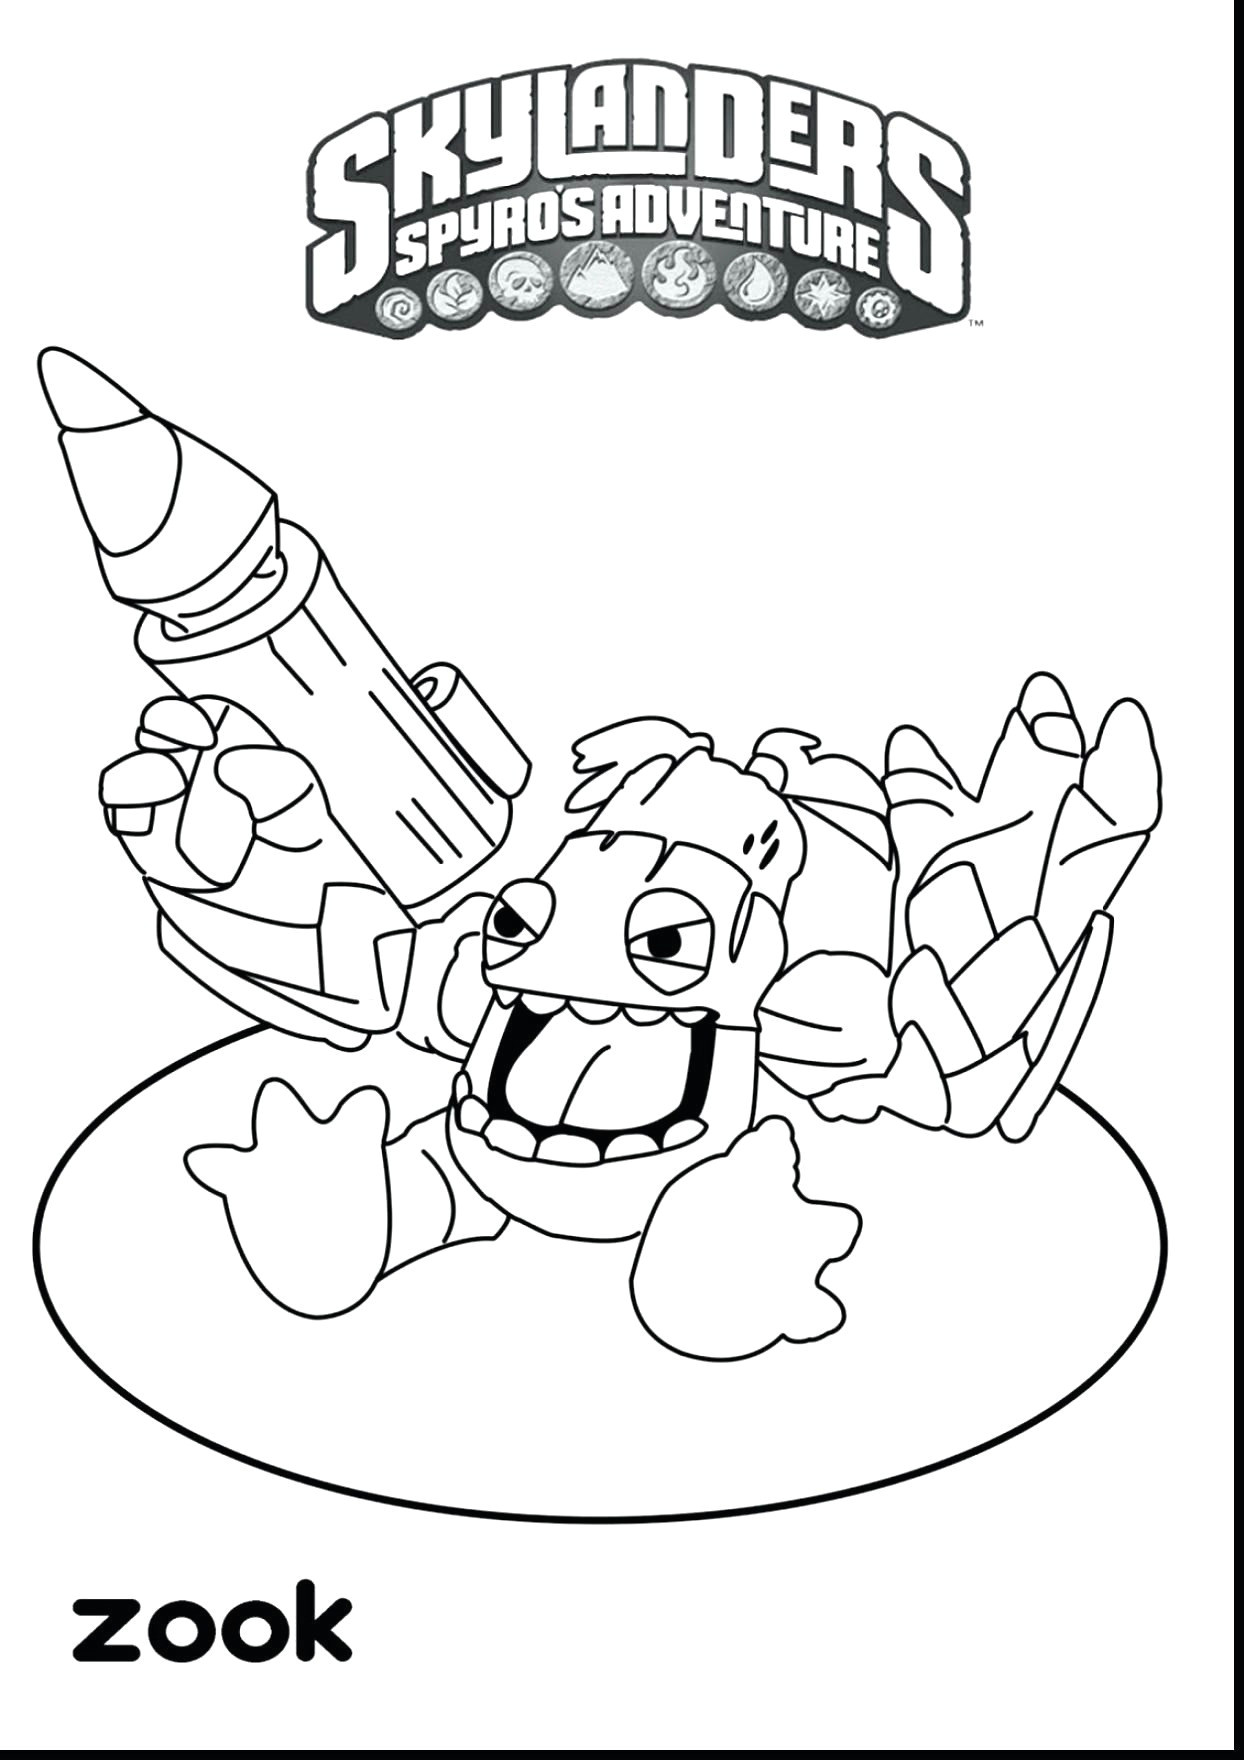 Easy Drawing Websites Www Colouring Pages Brilliant Easy to Draw Instruments Home Coloring